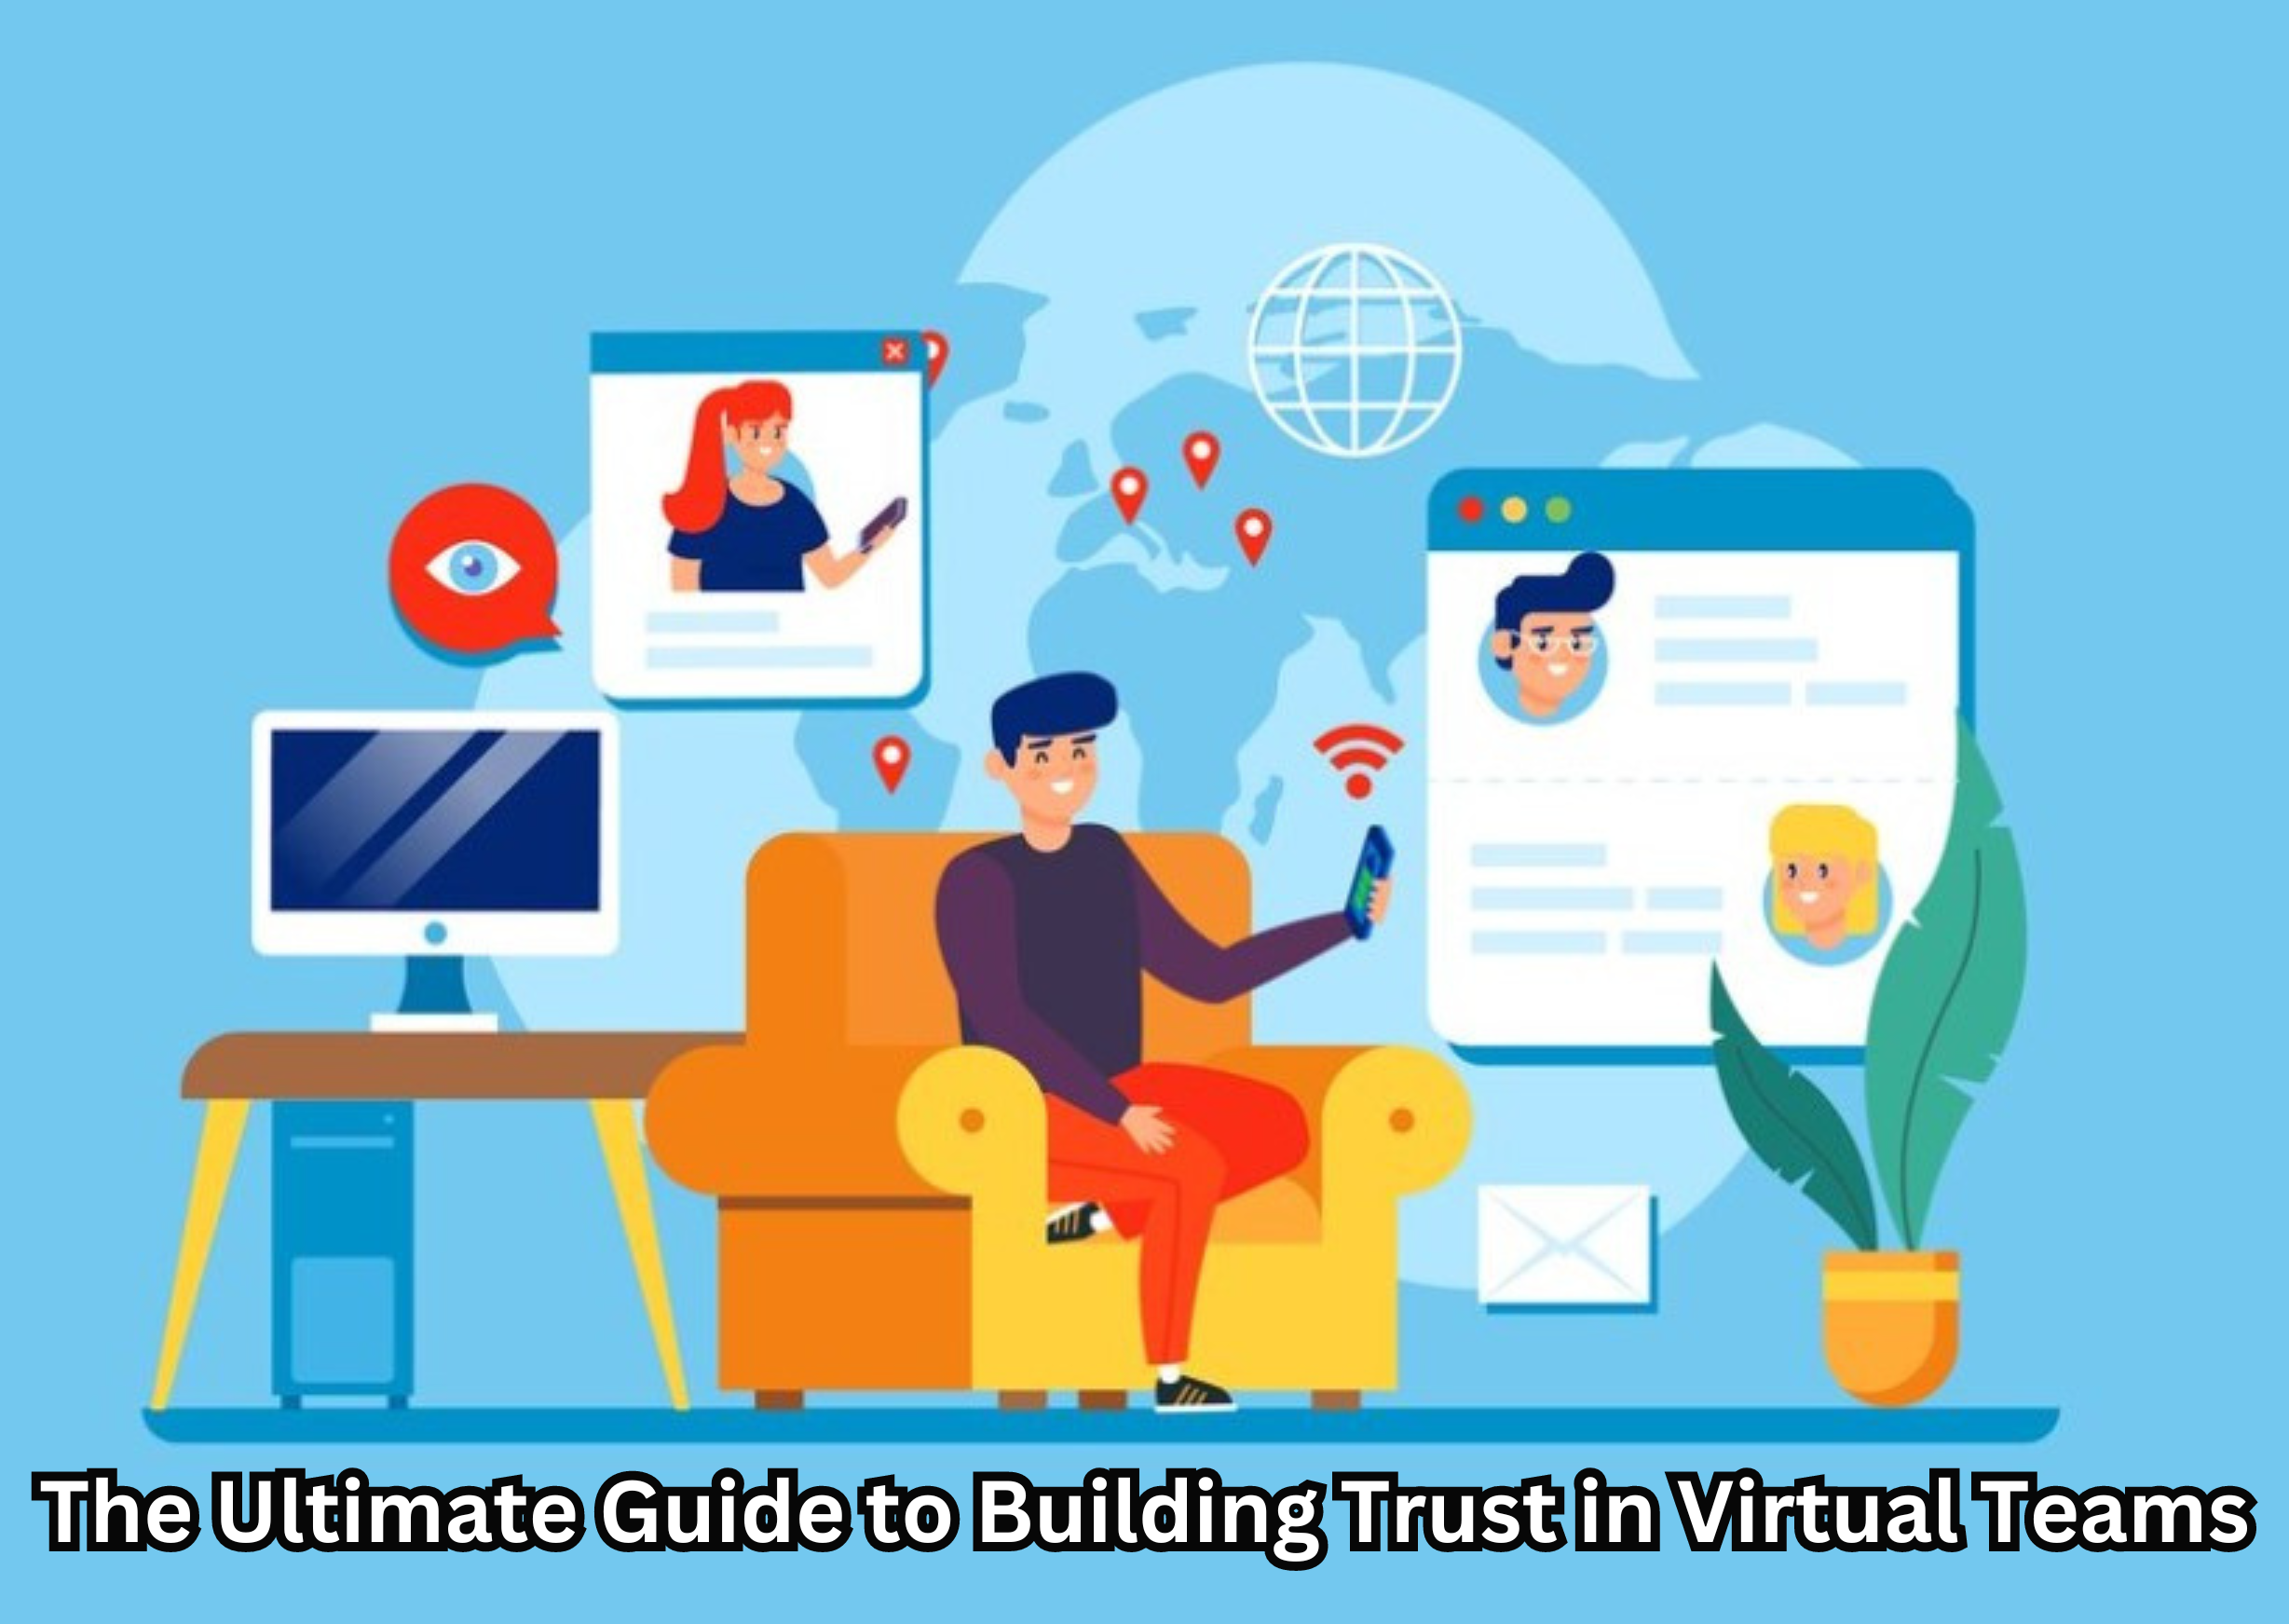 The Ultimate Guide to Building Trust in Virtual Teams